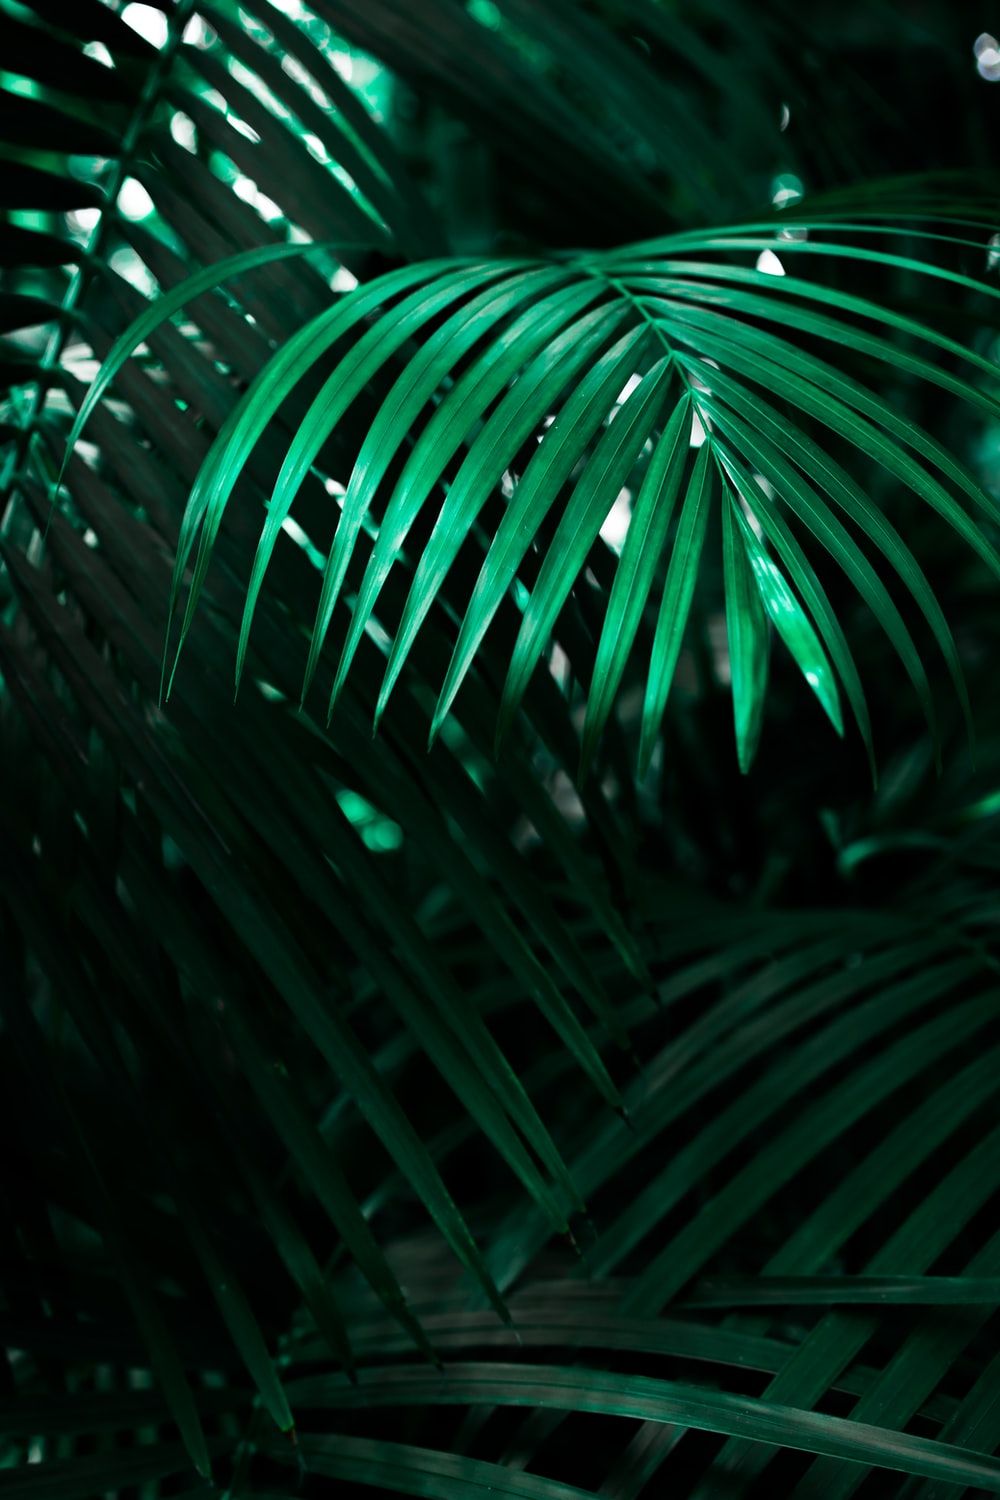 Tropical Plant Picture. Download Free Image